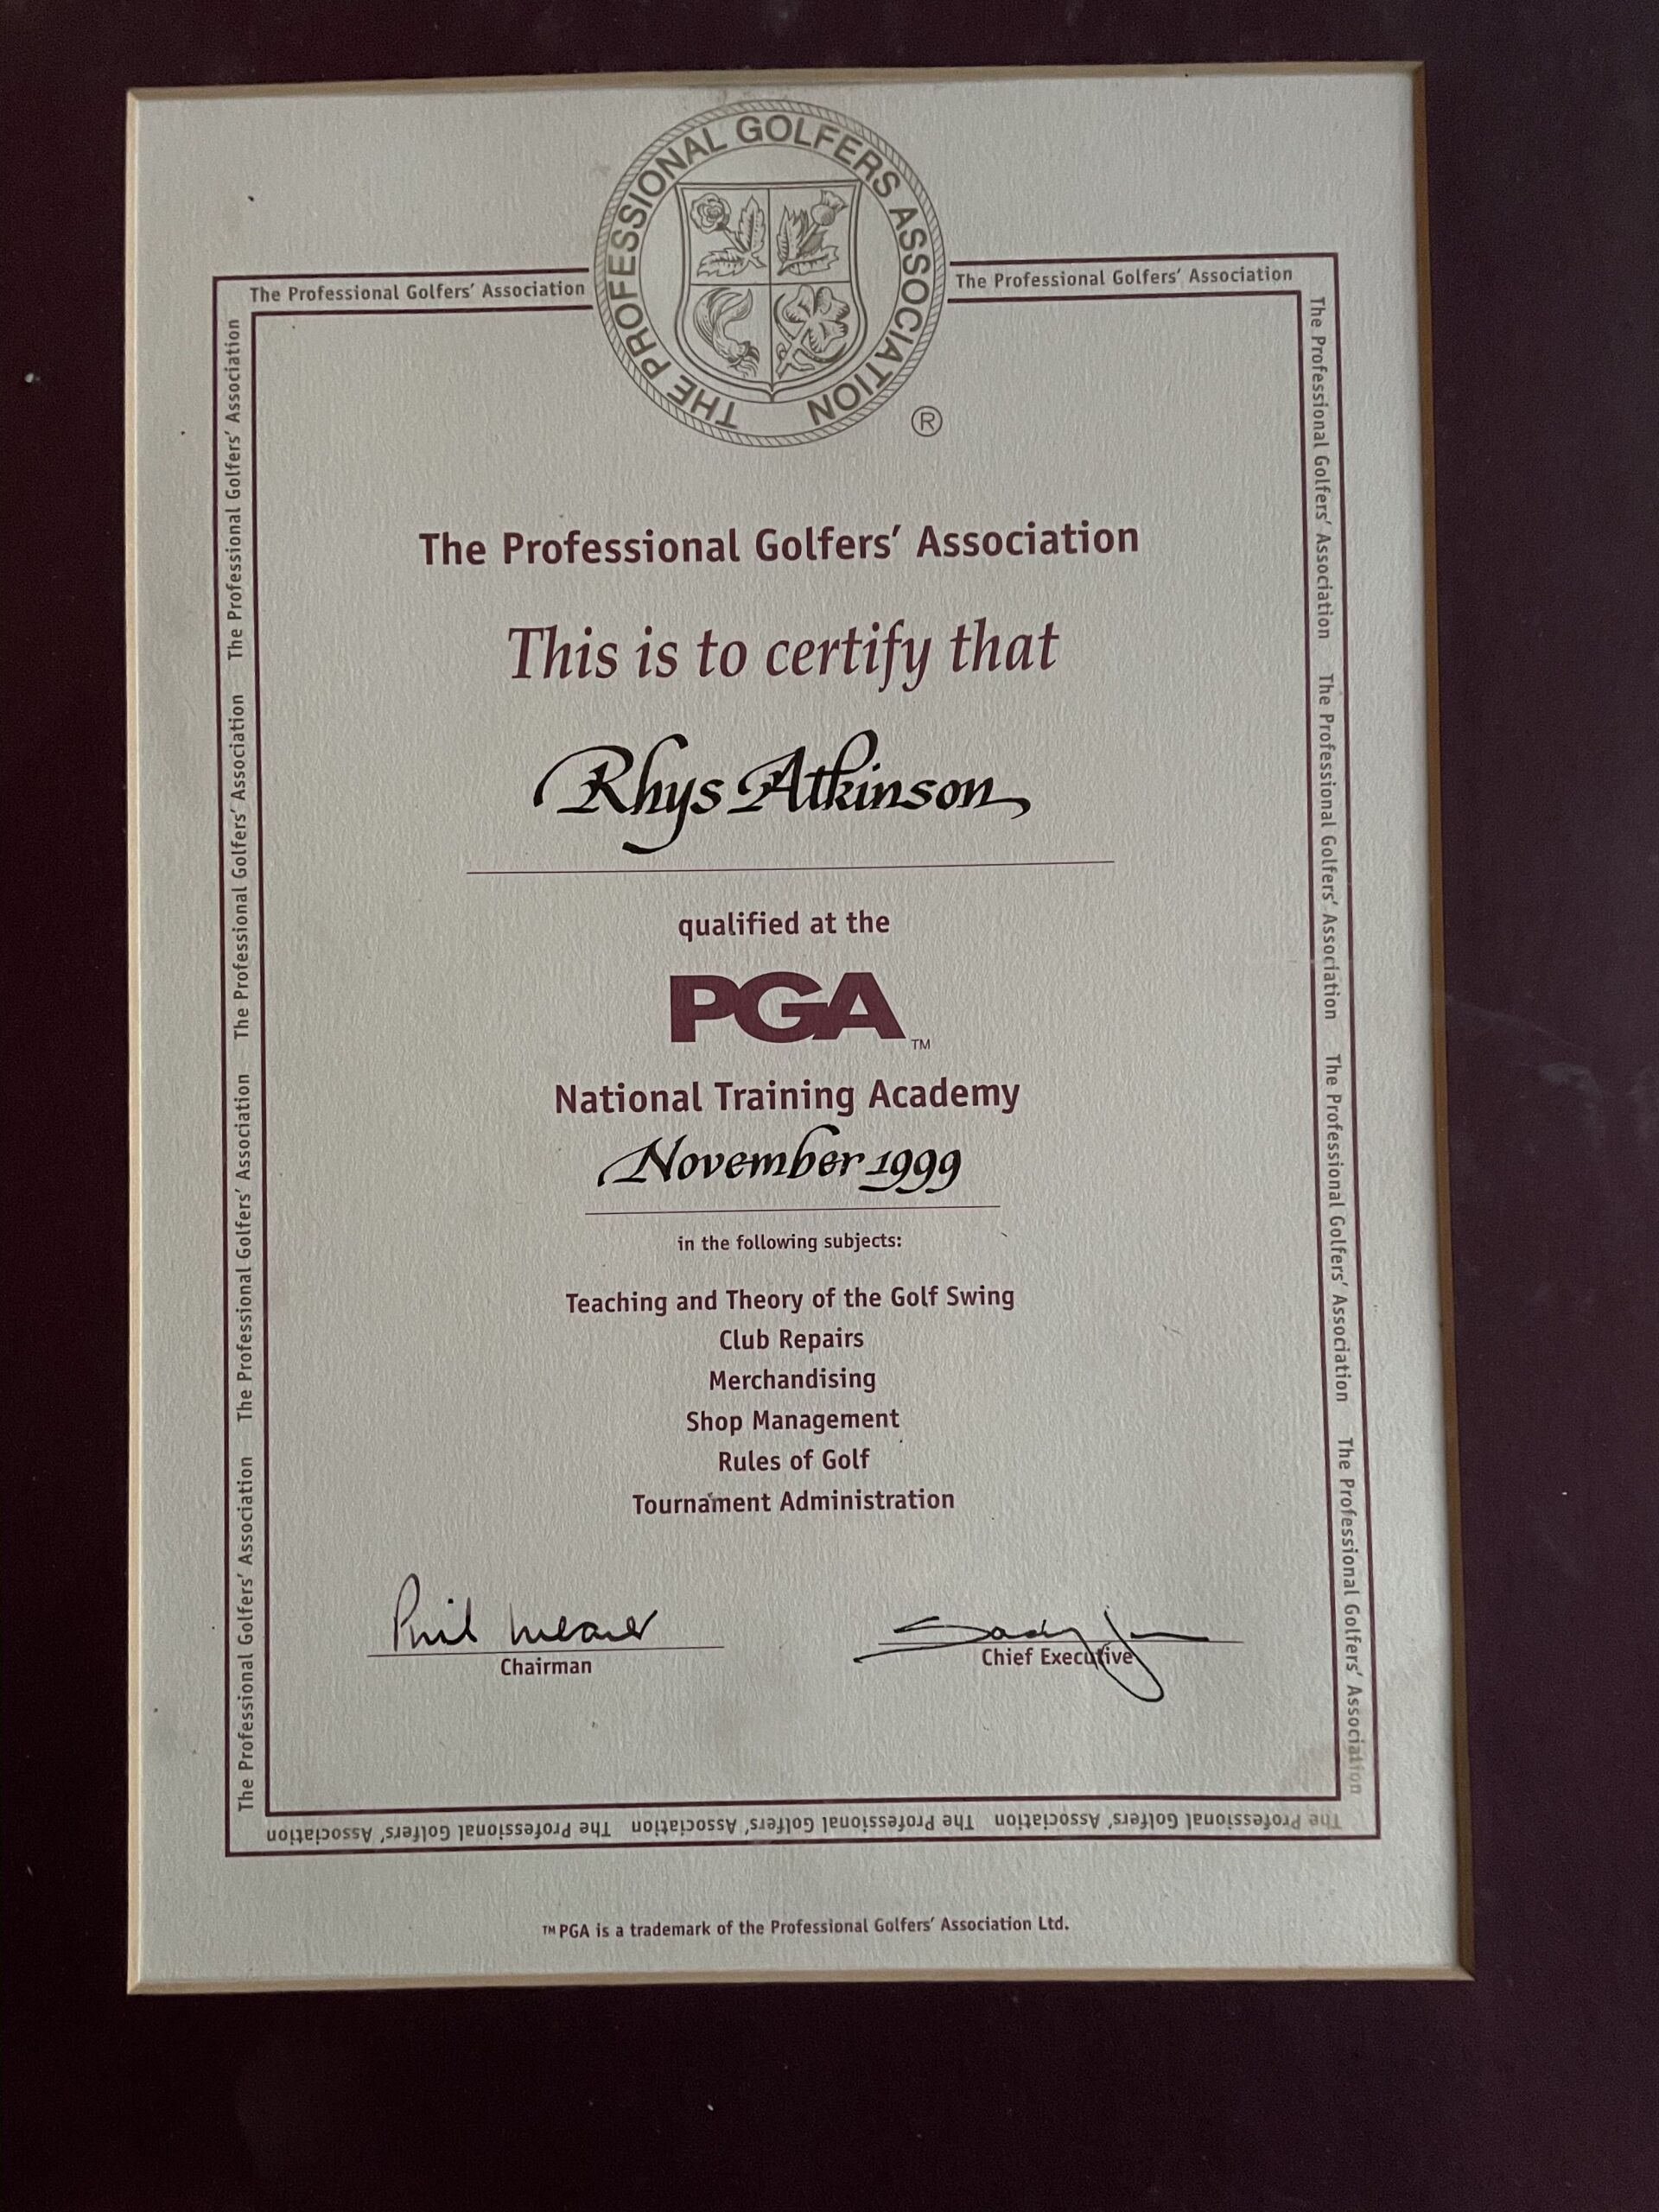 Qualification as a PGA Pro